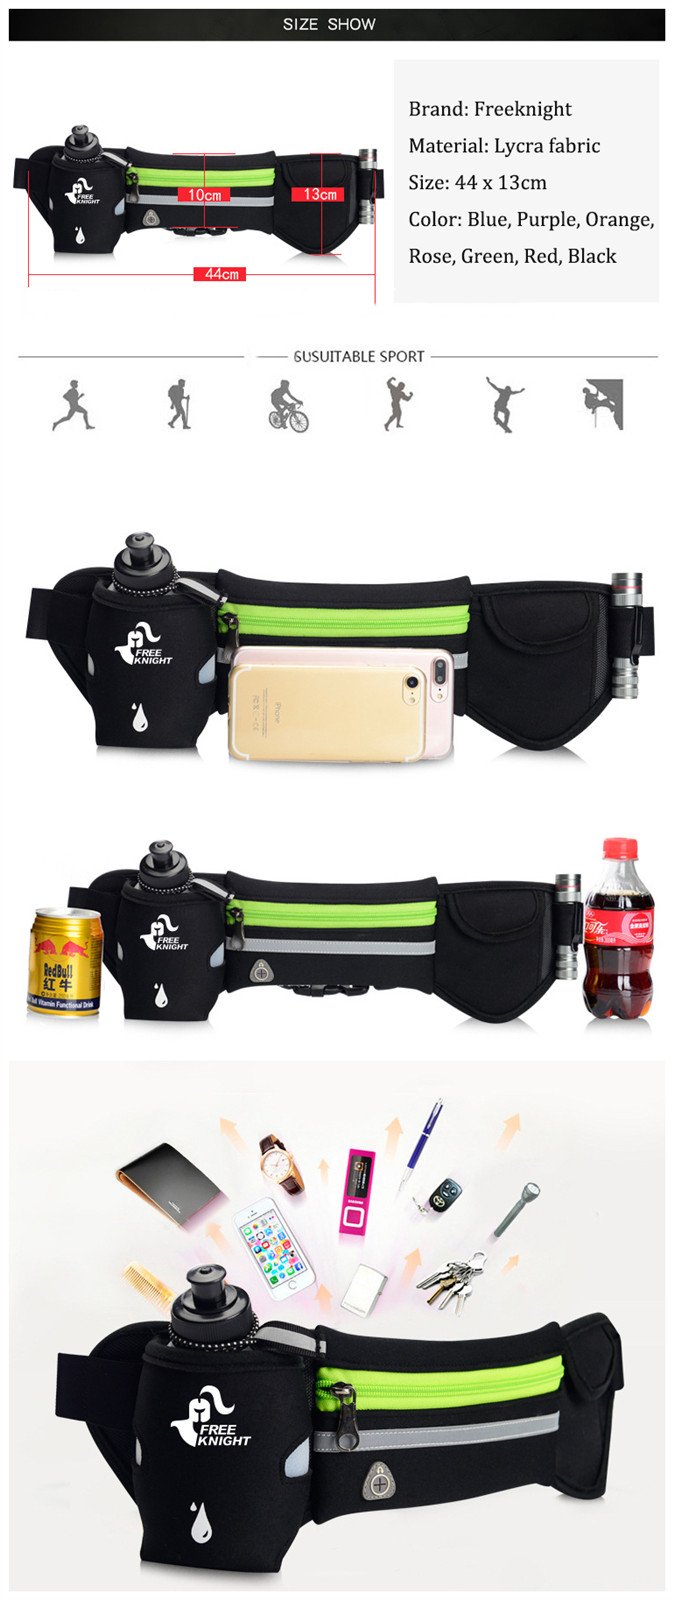 Free-Knight-Sports-Reflective-Waist-Bag-Bottle-Pouch-iPhone-7-Plus-Holder-With-Earphone-Hole-1120378-6